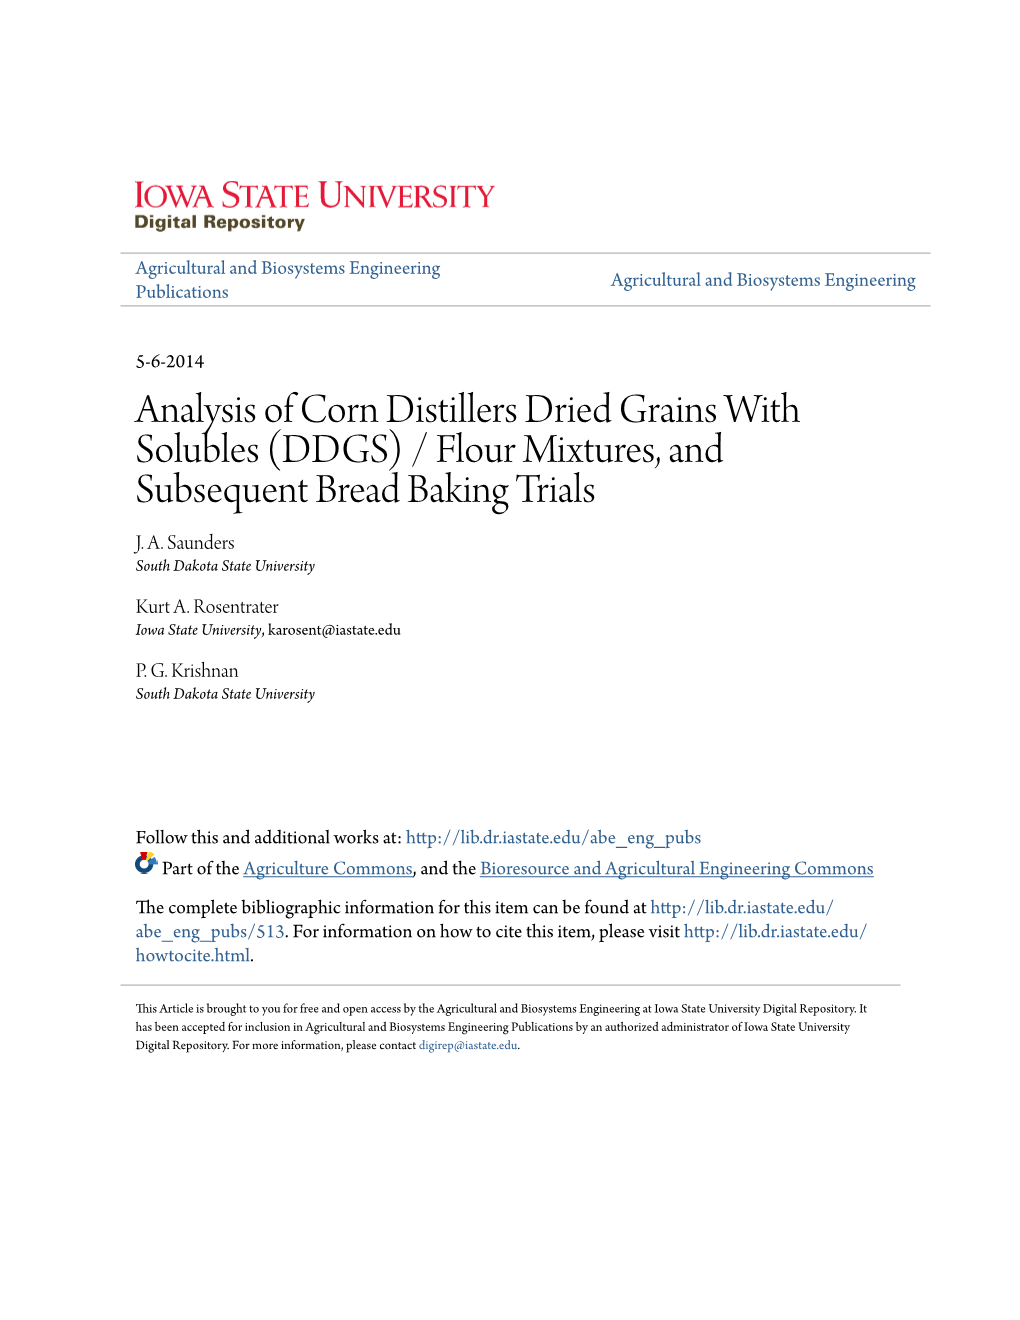 Analysis of Corn Distillers Dried Grains with Solubles (DDGS)/Flour Mixtures, and Subsequent Bread Baking Trials